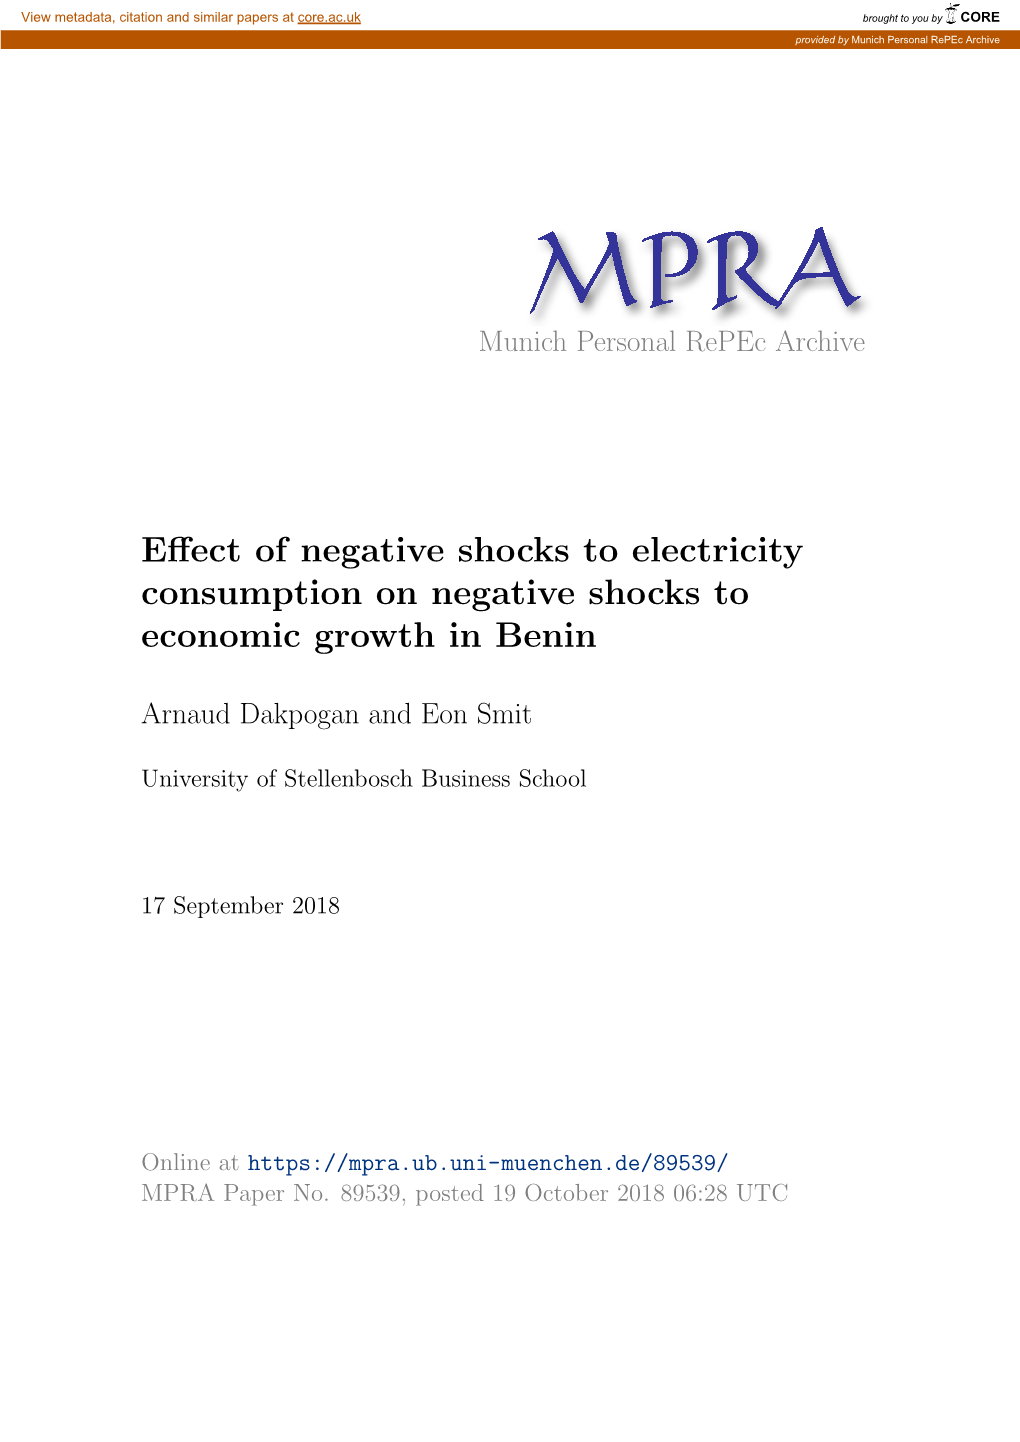 Effect of Negative Shocks to Electricity Consumption on Negative Shocks to Economic Growth in Benin